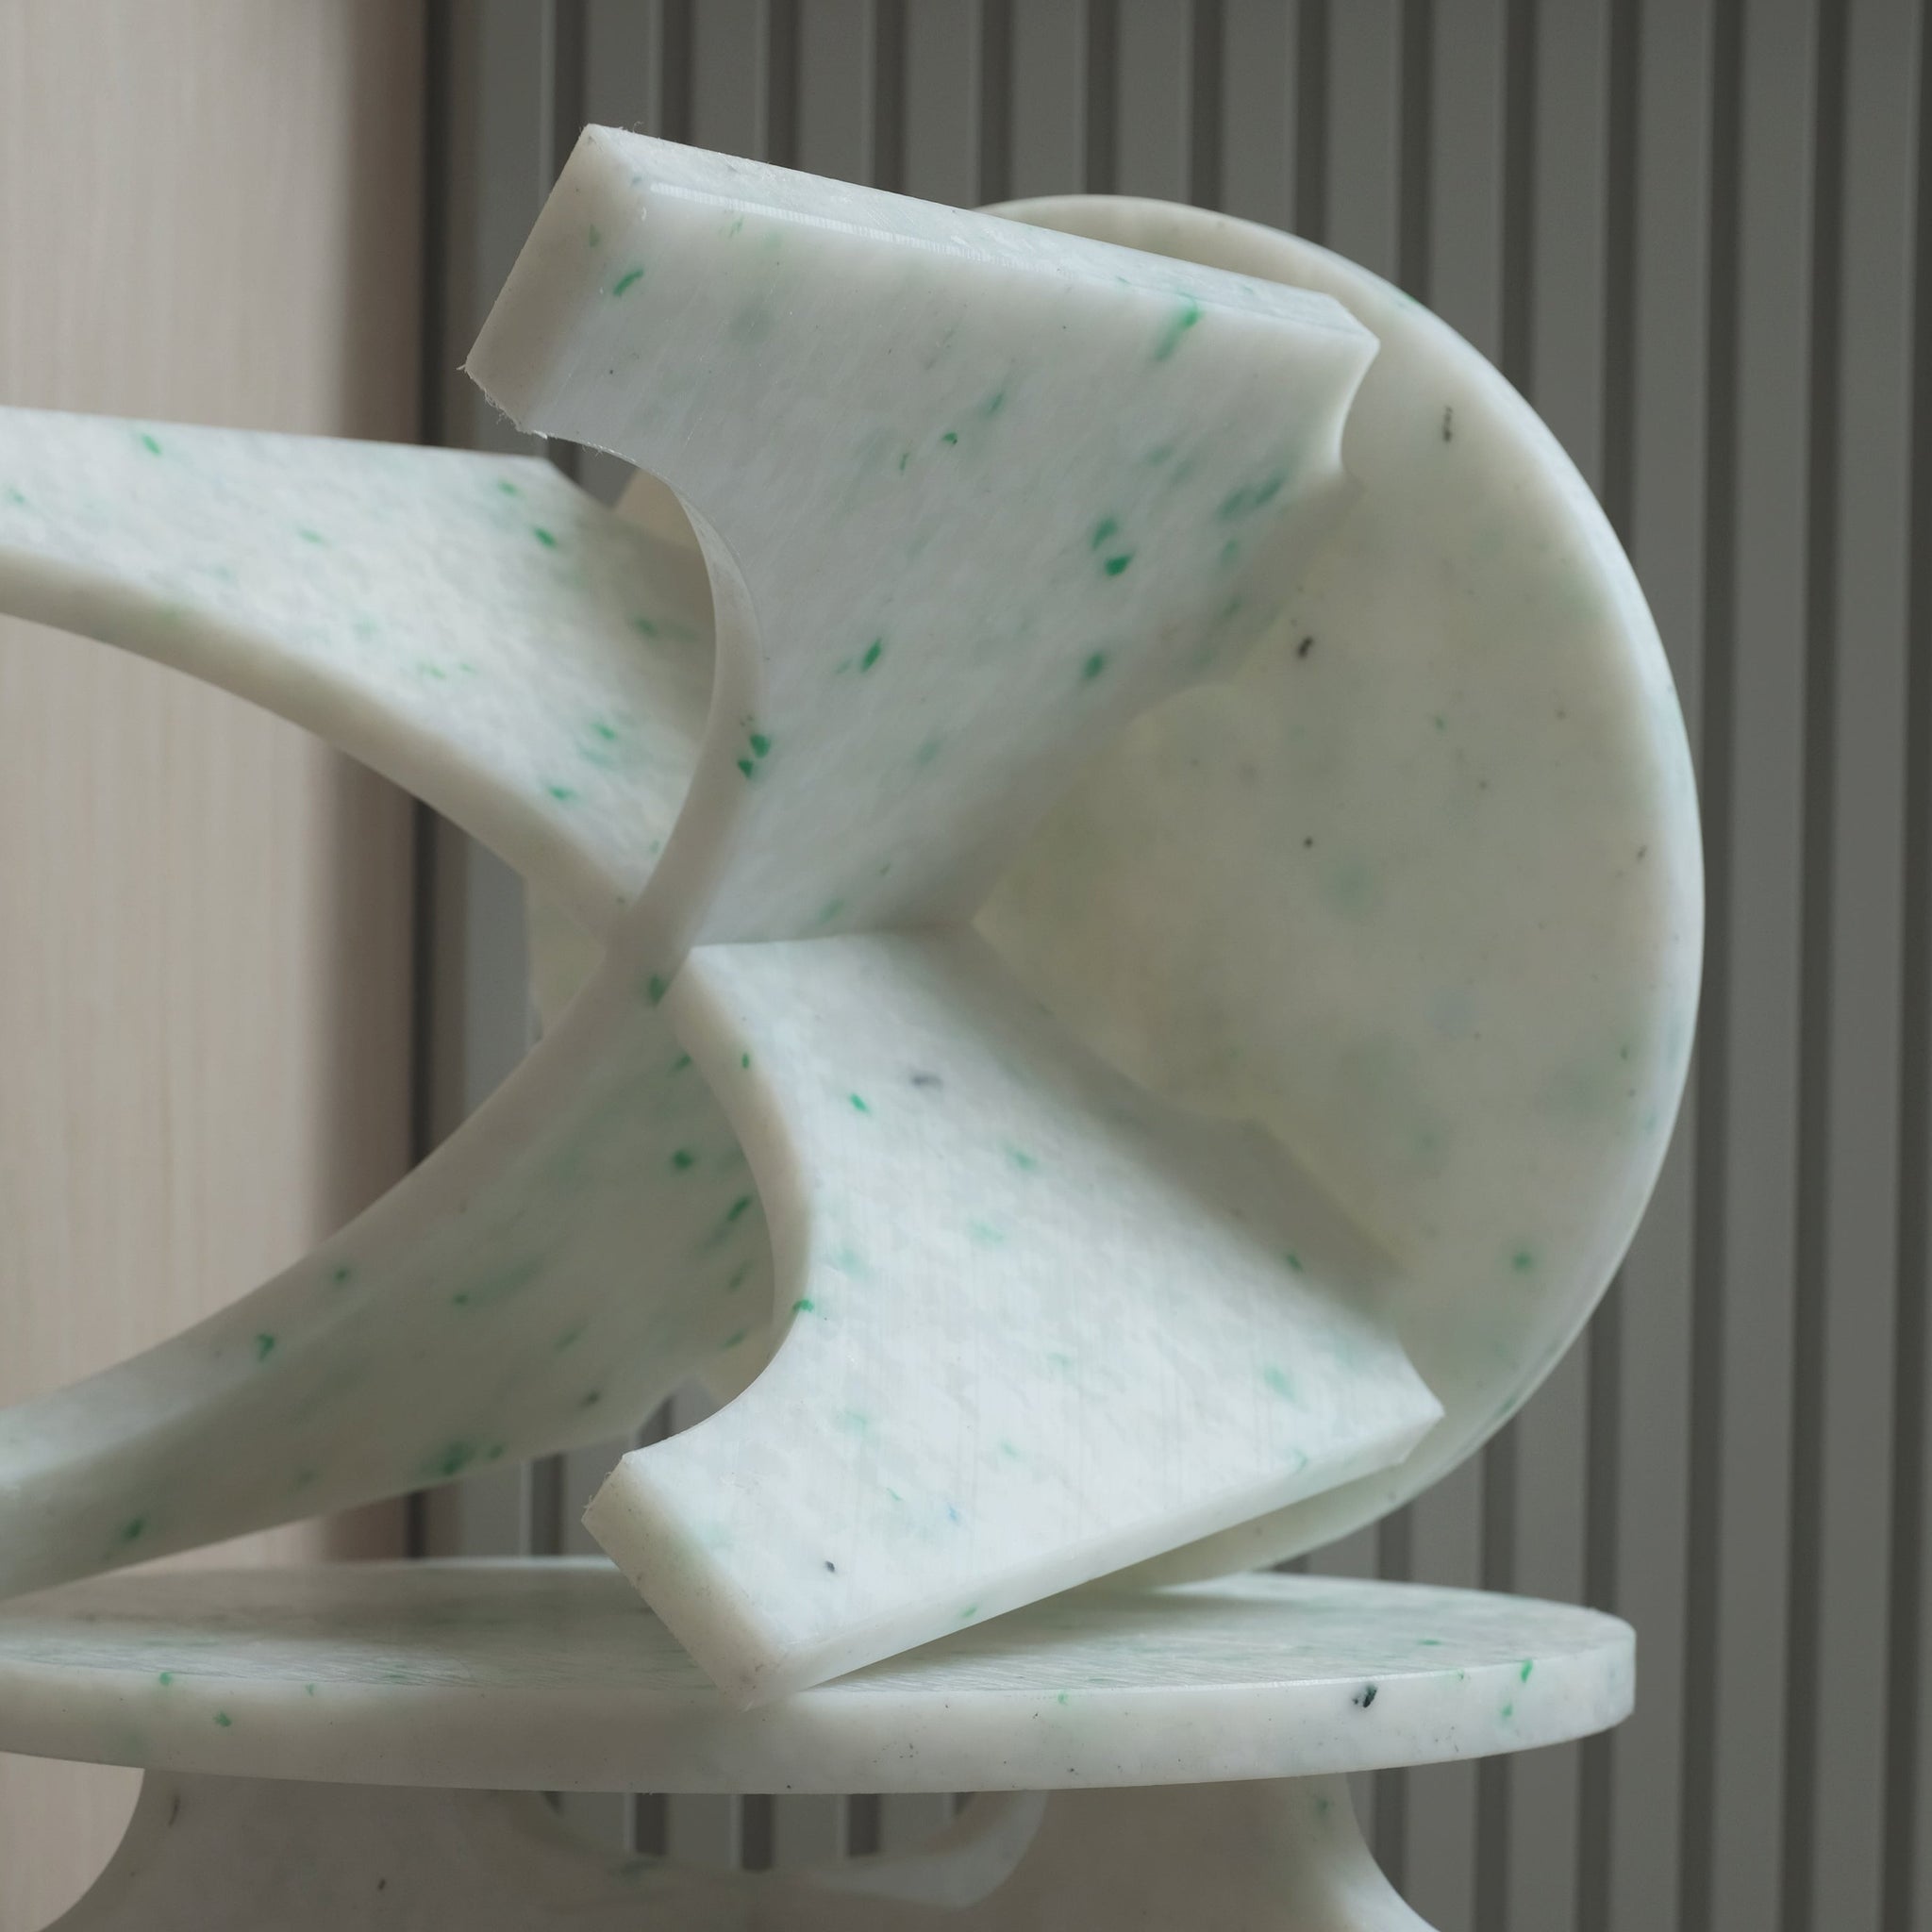 DETAIL OF WHITE STOOL BY THE MINIMONO PROJECT - BRAND FOR ECO FRIENDLY - PLAYFUL - MULTI FUNCTIONAL - SUSTAINABLE - HIGH QUALITY - DESIGN FURNITURE FROM RECYCLED PLASTIC FOR BOTH ADULT AND CHILDREN MADE IN BERLIN GERMANY